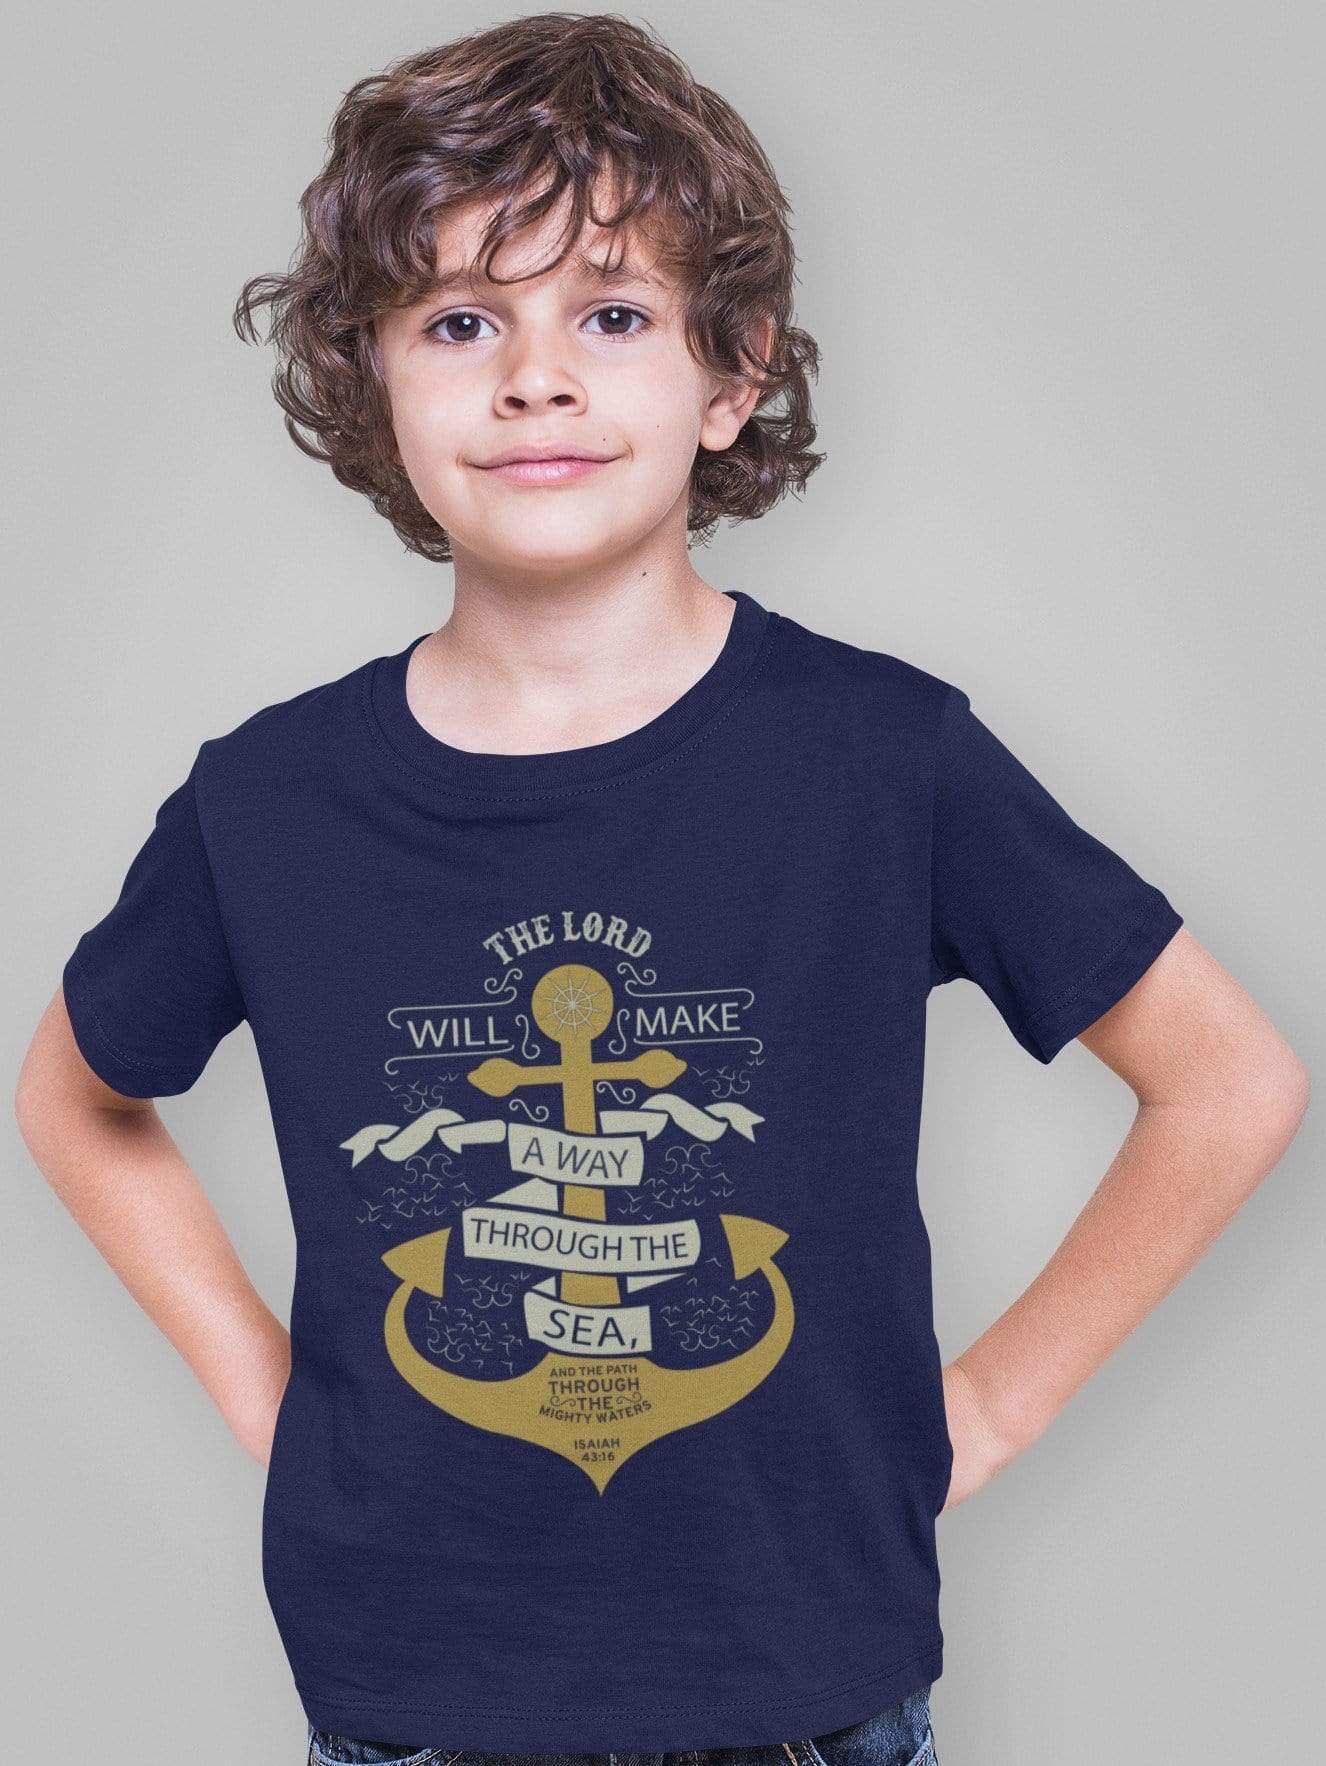 Living Words Kids Round Neck T Shirt Boy / 12-23 Mn / Navy Blue Kid's Jesus/Christian T Shirts - The Lord will make a way